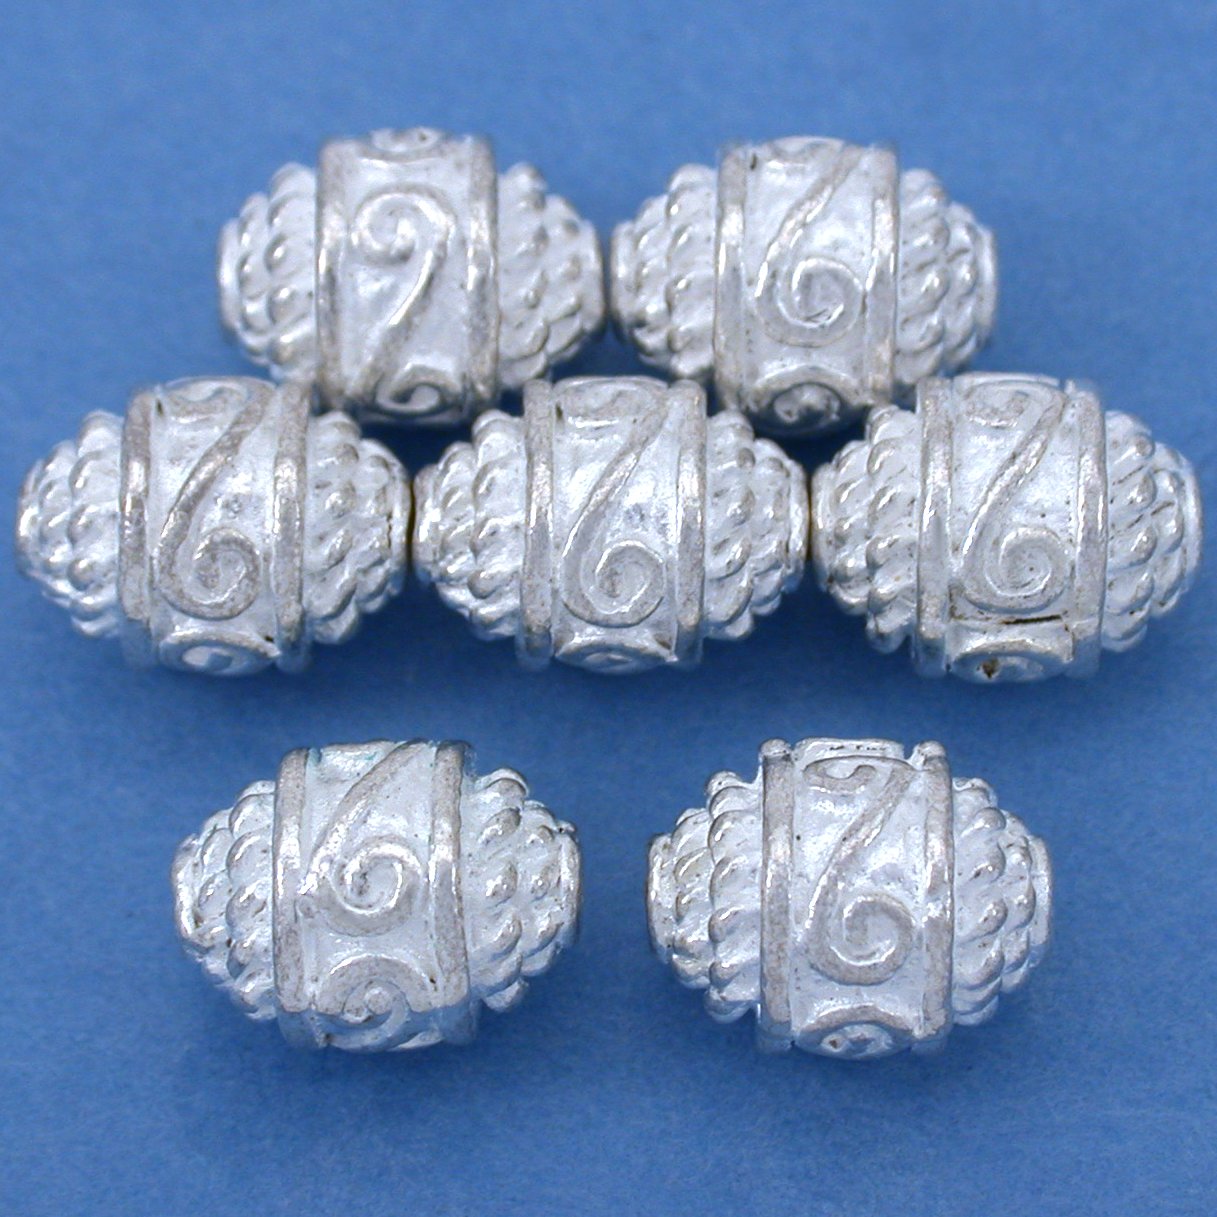 Bali Oval Barrel Silver Plated Beads 10.5mm 16 Grams 6Pcs Approx.